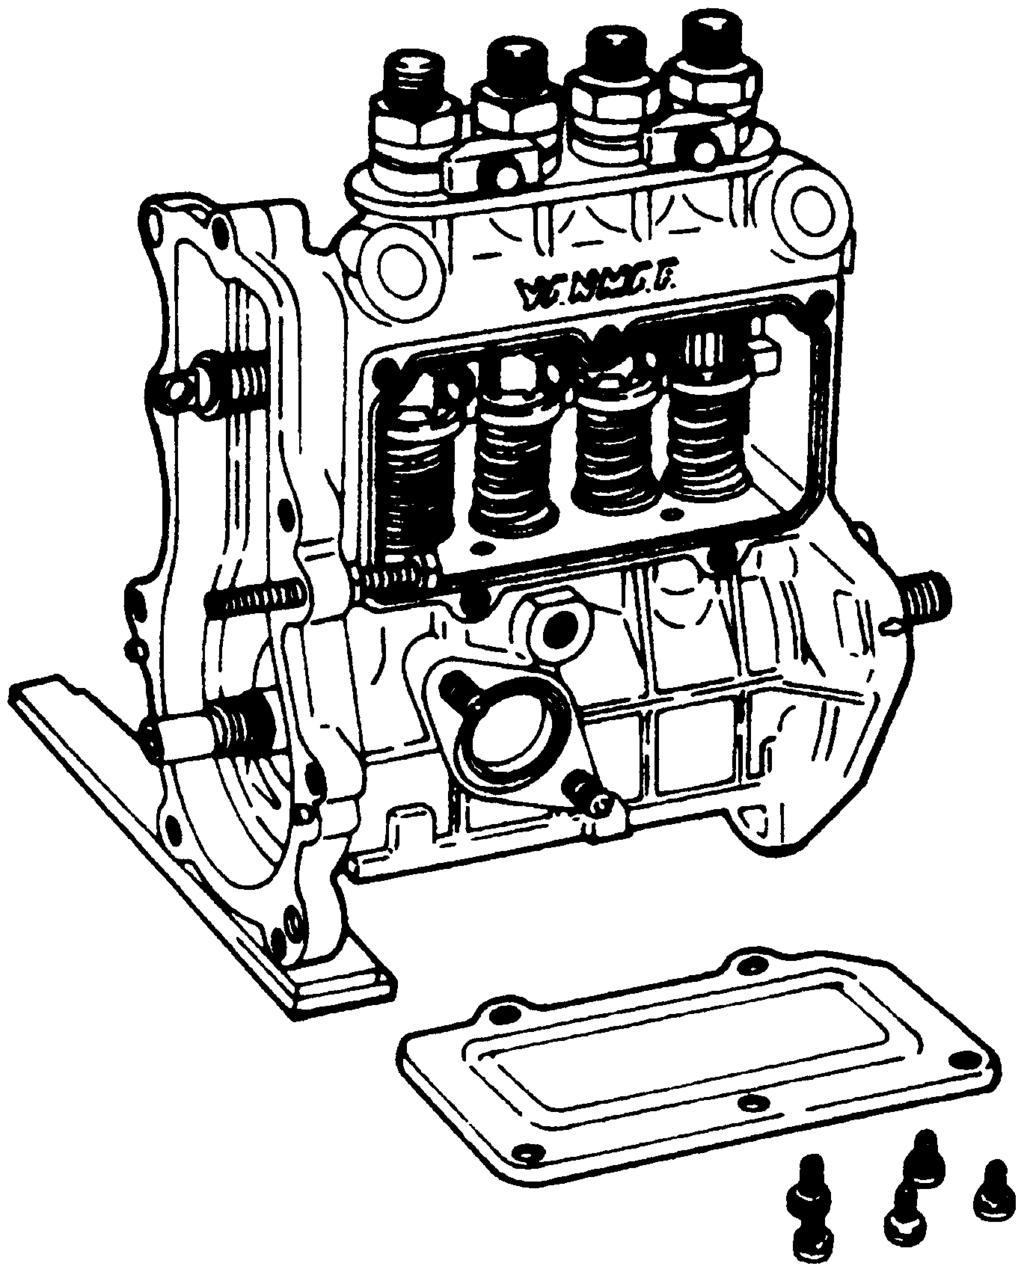 (2) Turn the fuel injection pump upside down to drain fuel oil.